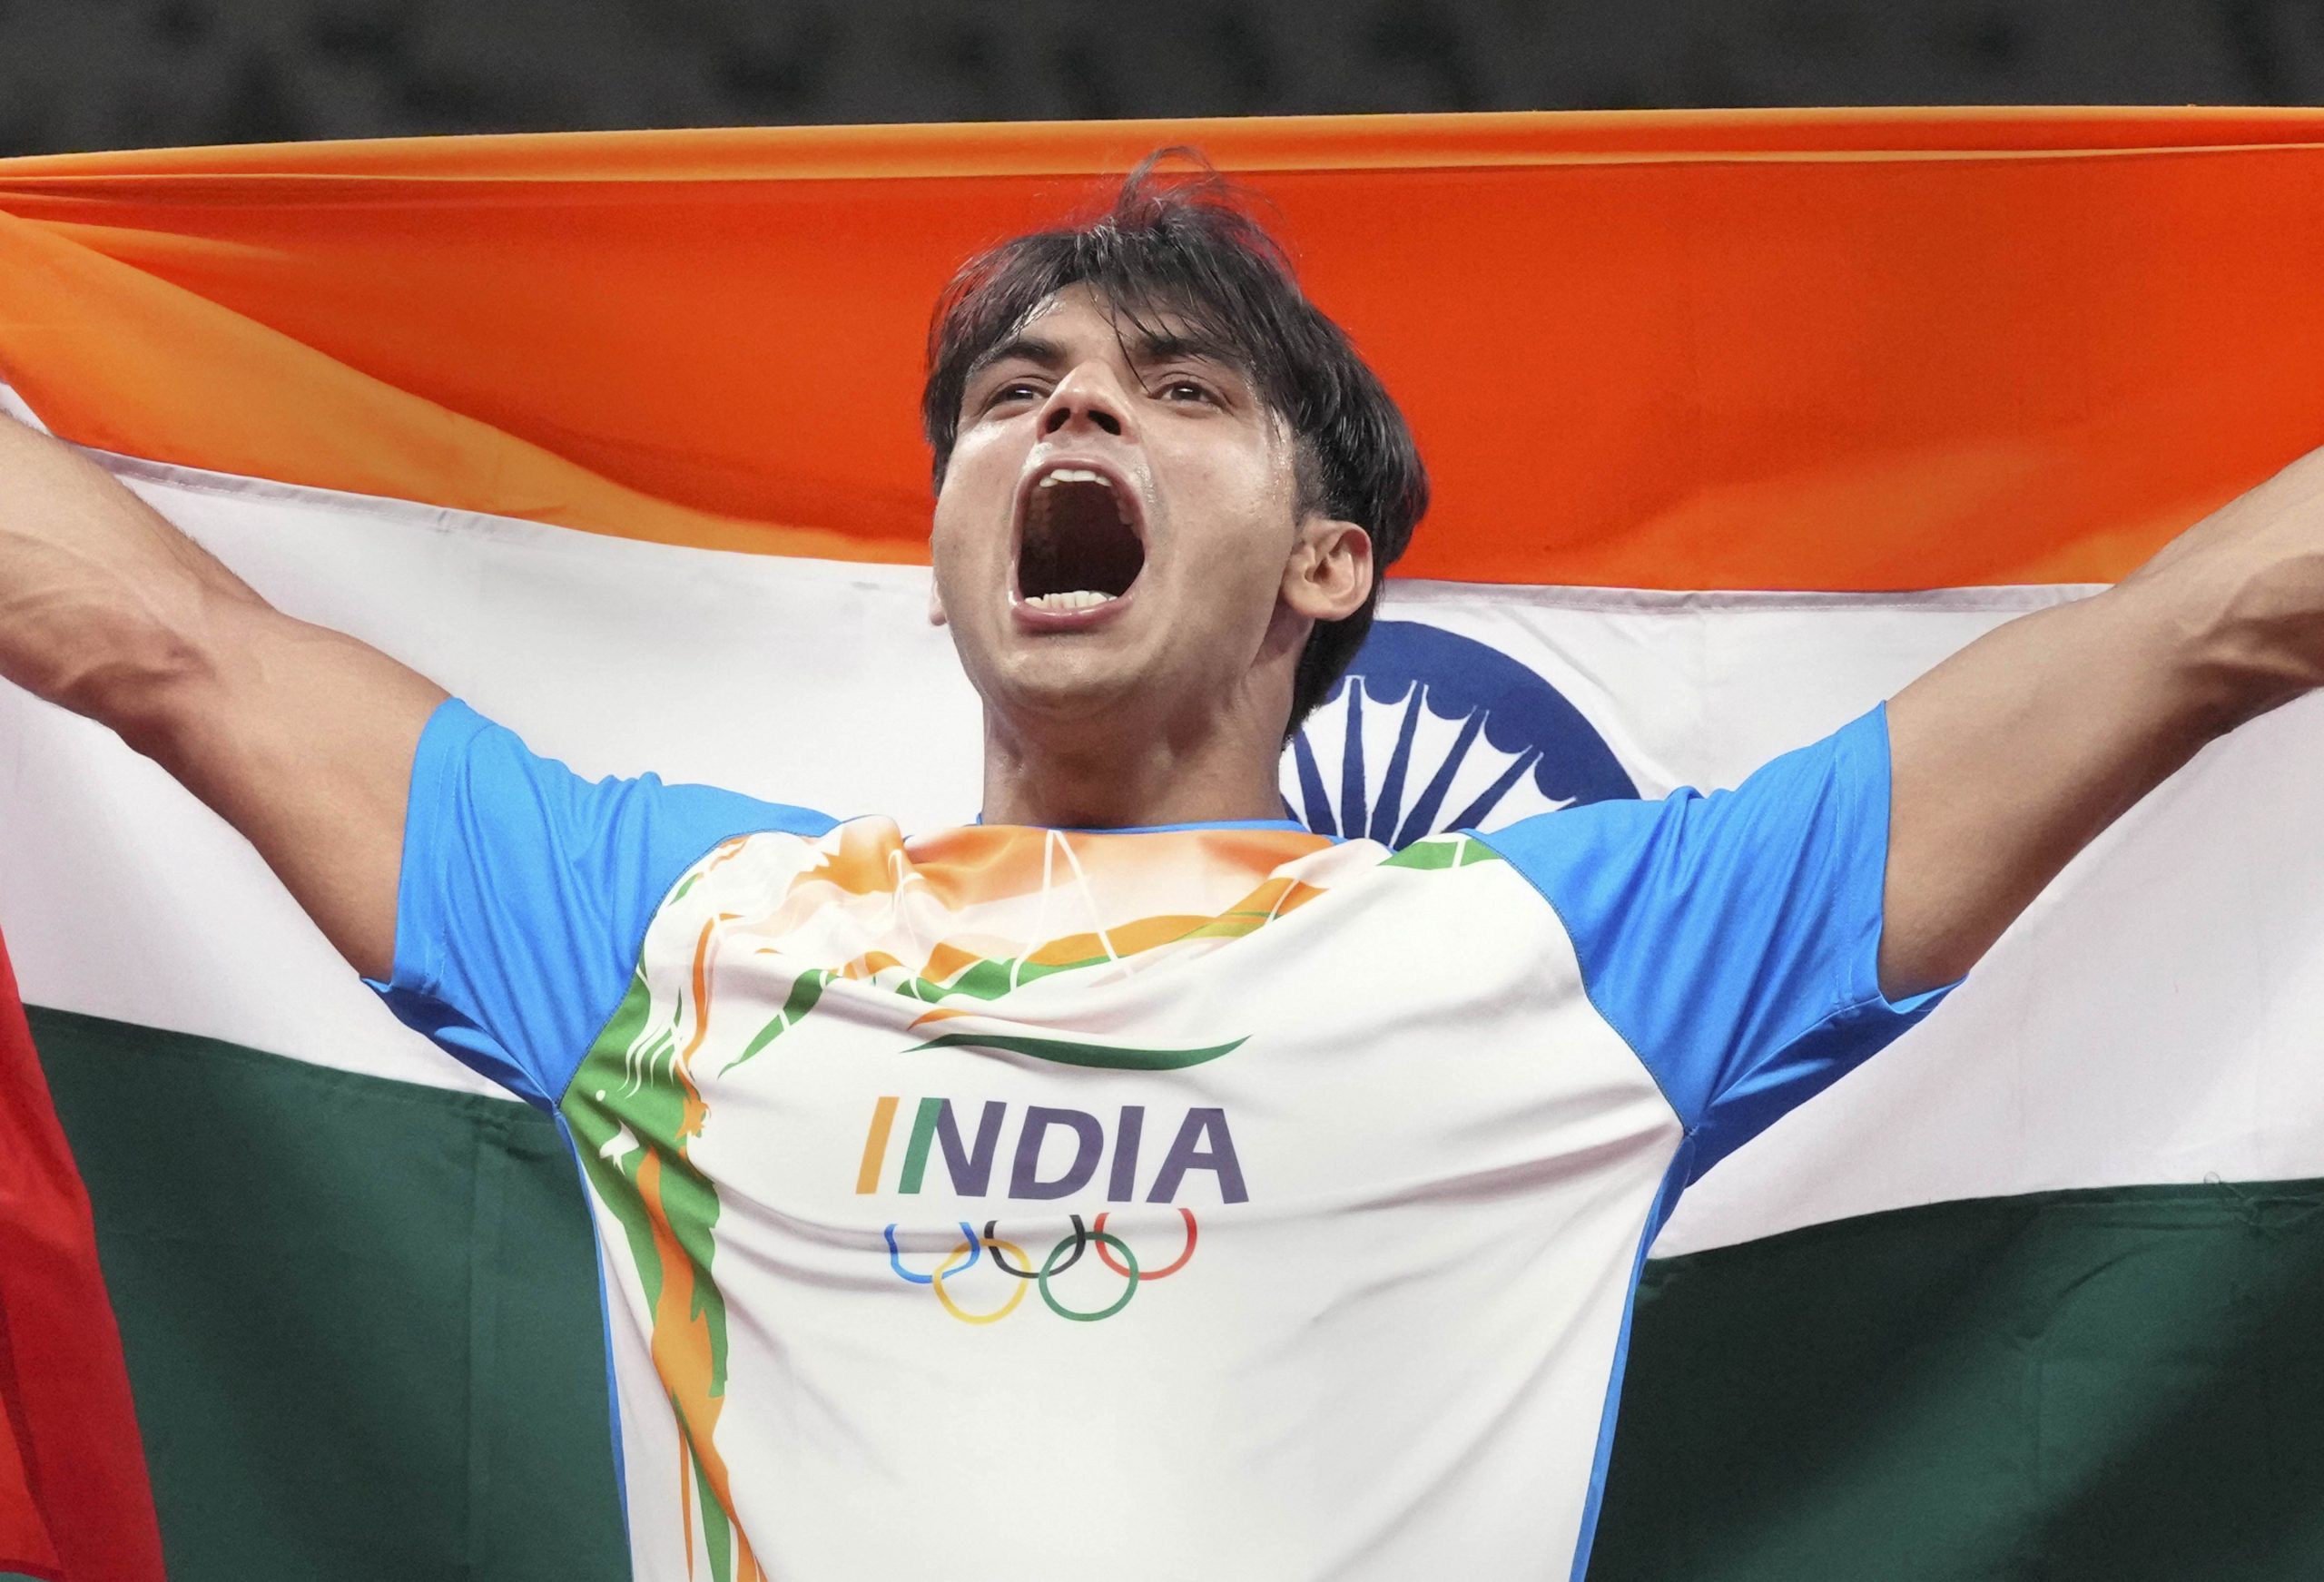 Neeraj Chopra wins gold in javelin throw, India’s first Olympic medal in athletics